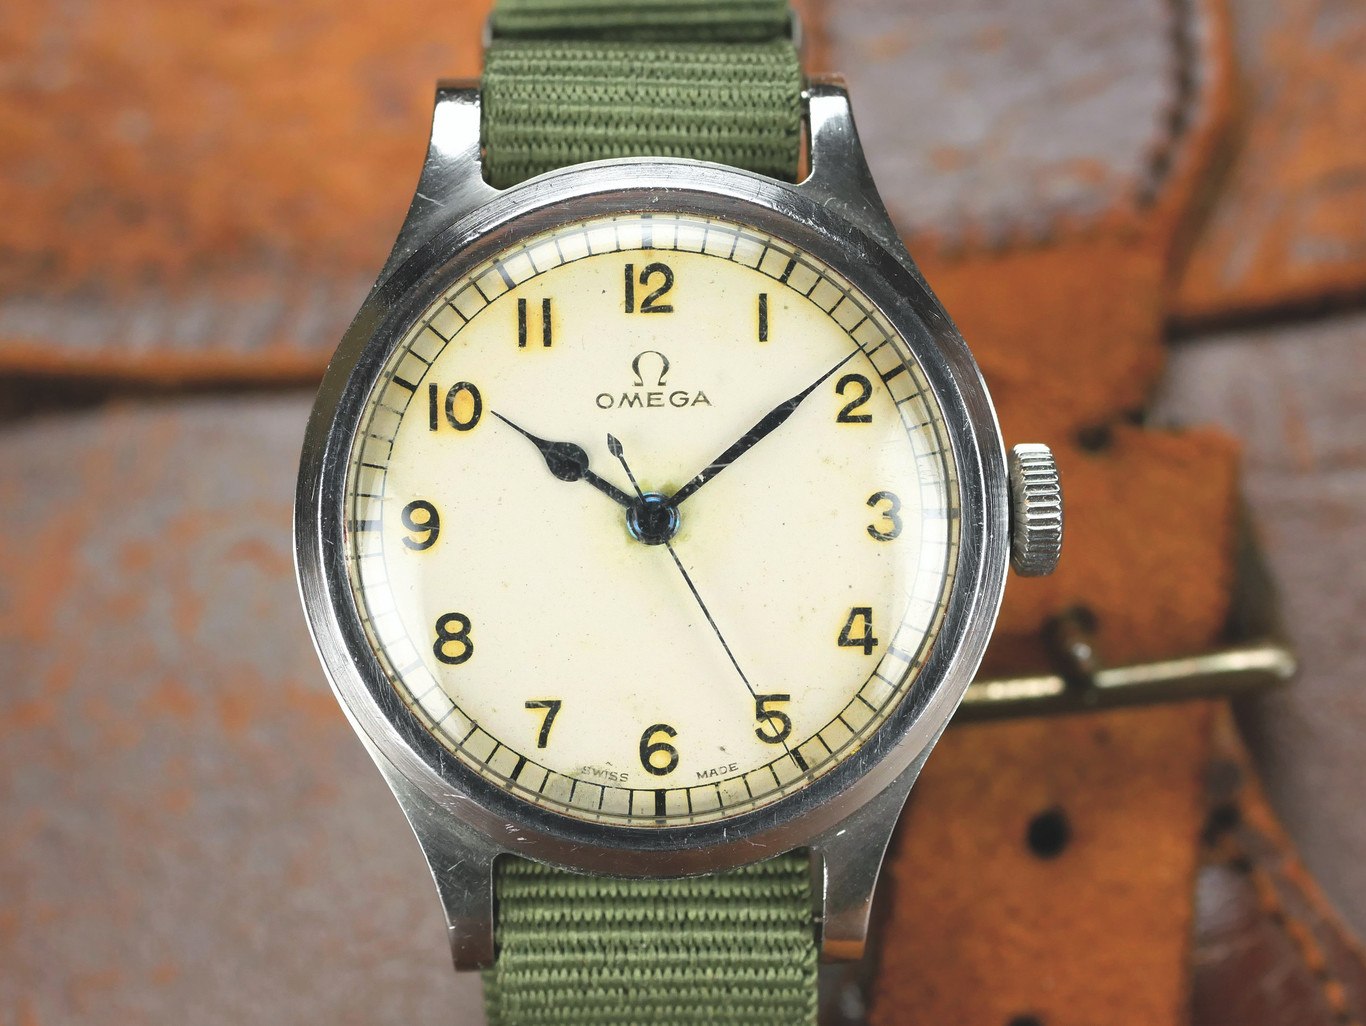 The Everest Journal The Most Important World War II Pilot Watches 